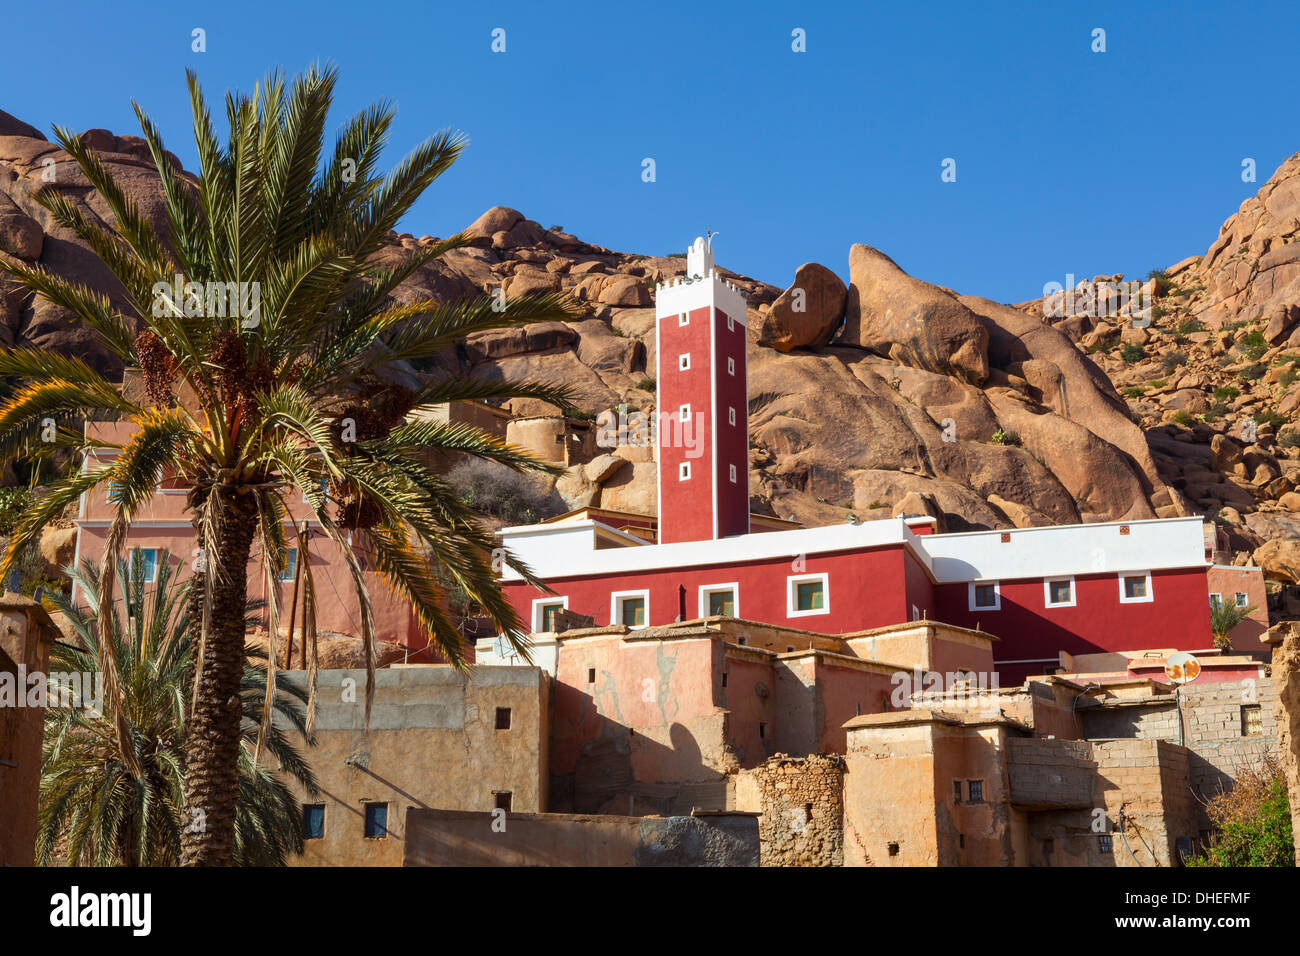 The Red Mosque of Adai, Tafraoute, Anti Atlas, Morocco, North Africa, Africa Stock Photo